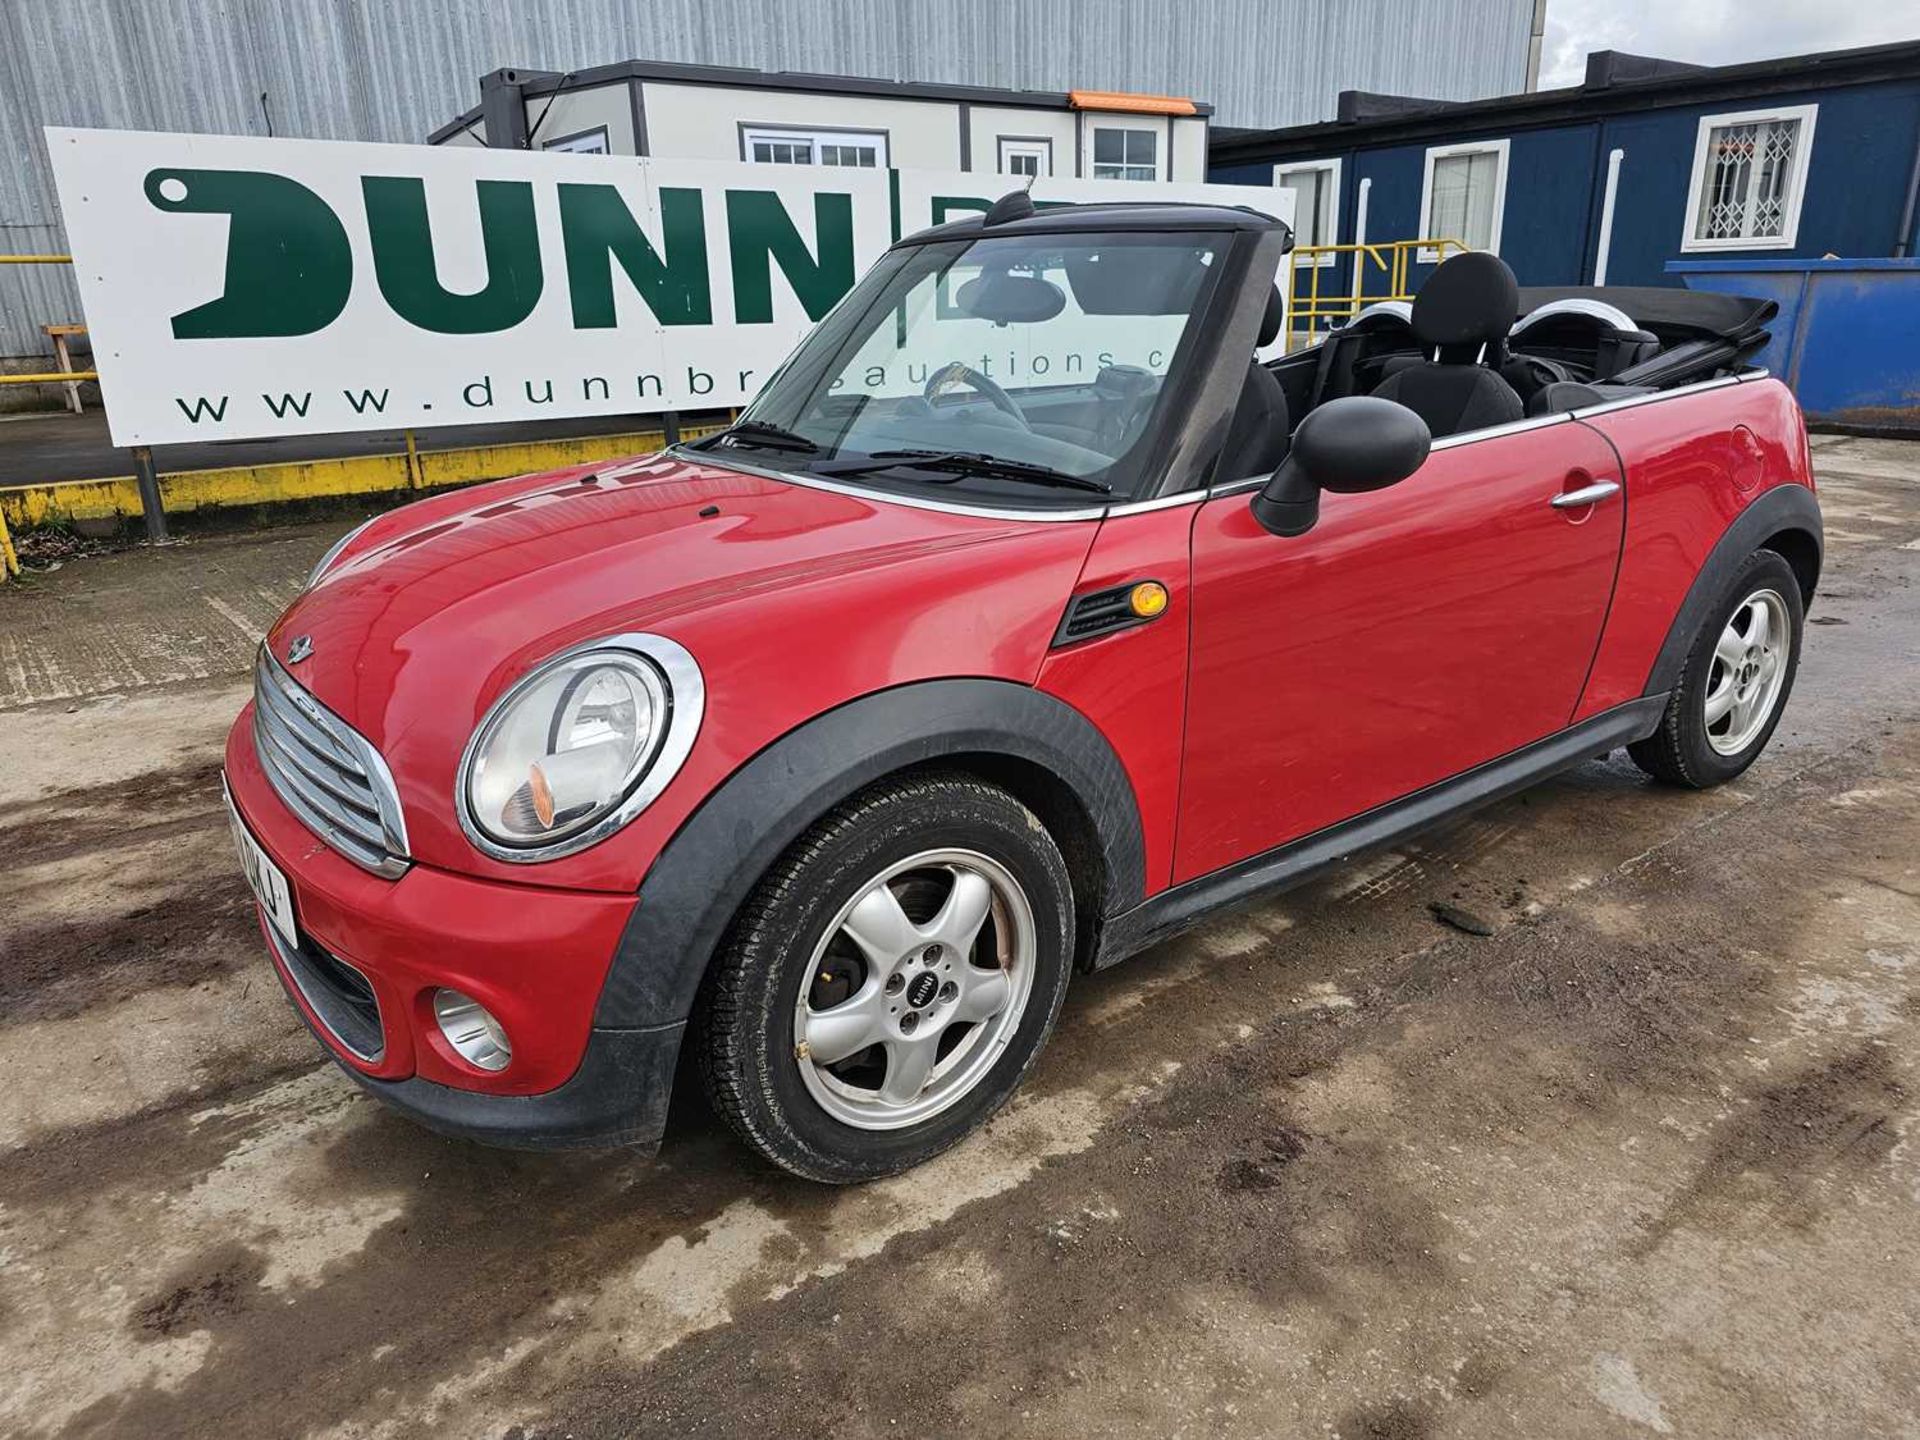 2011 Mini One Convertible, 6 Speed, Bluetooth, Cruise Control, A/C (Reg. Docs. Available)